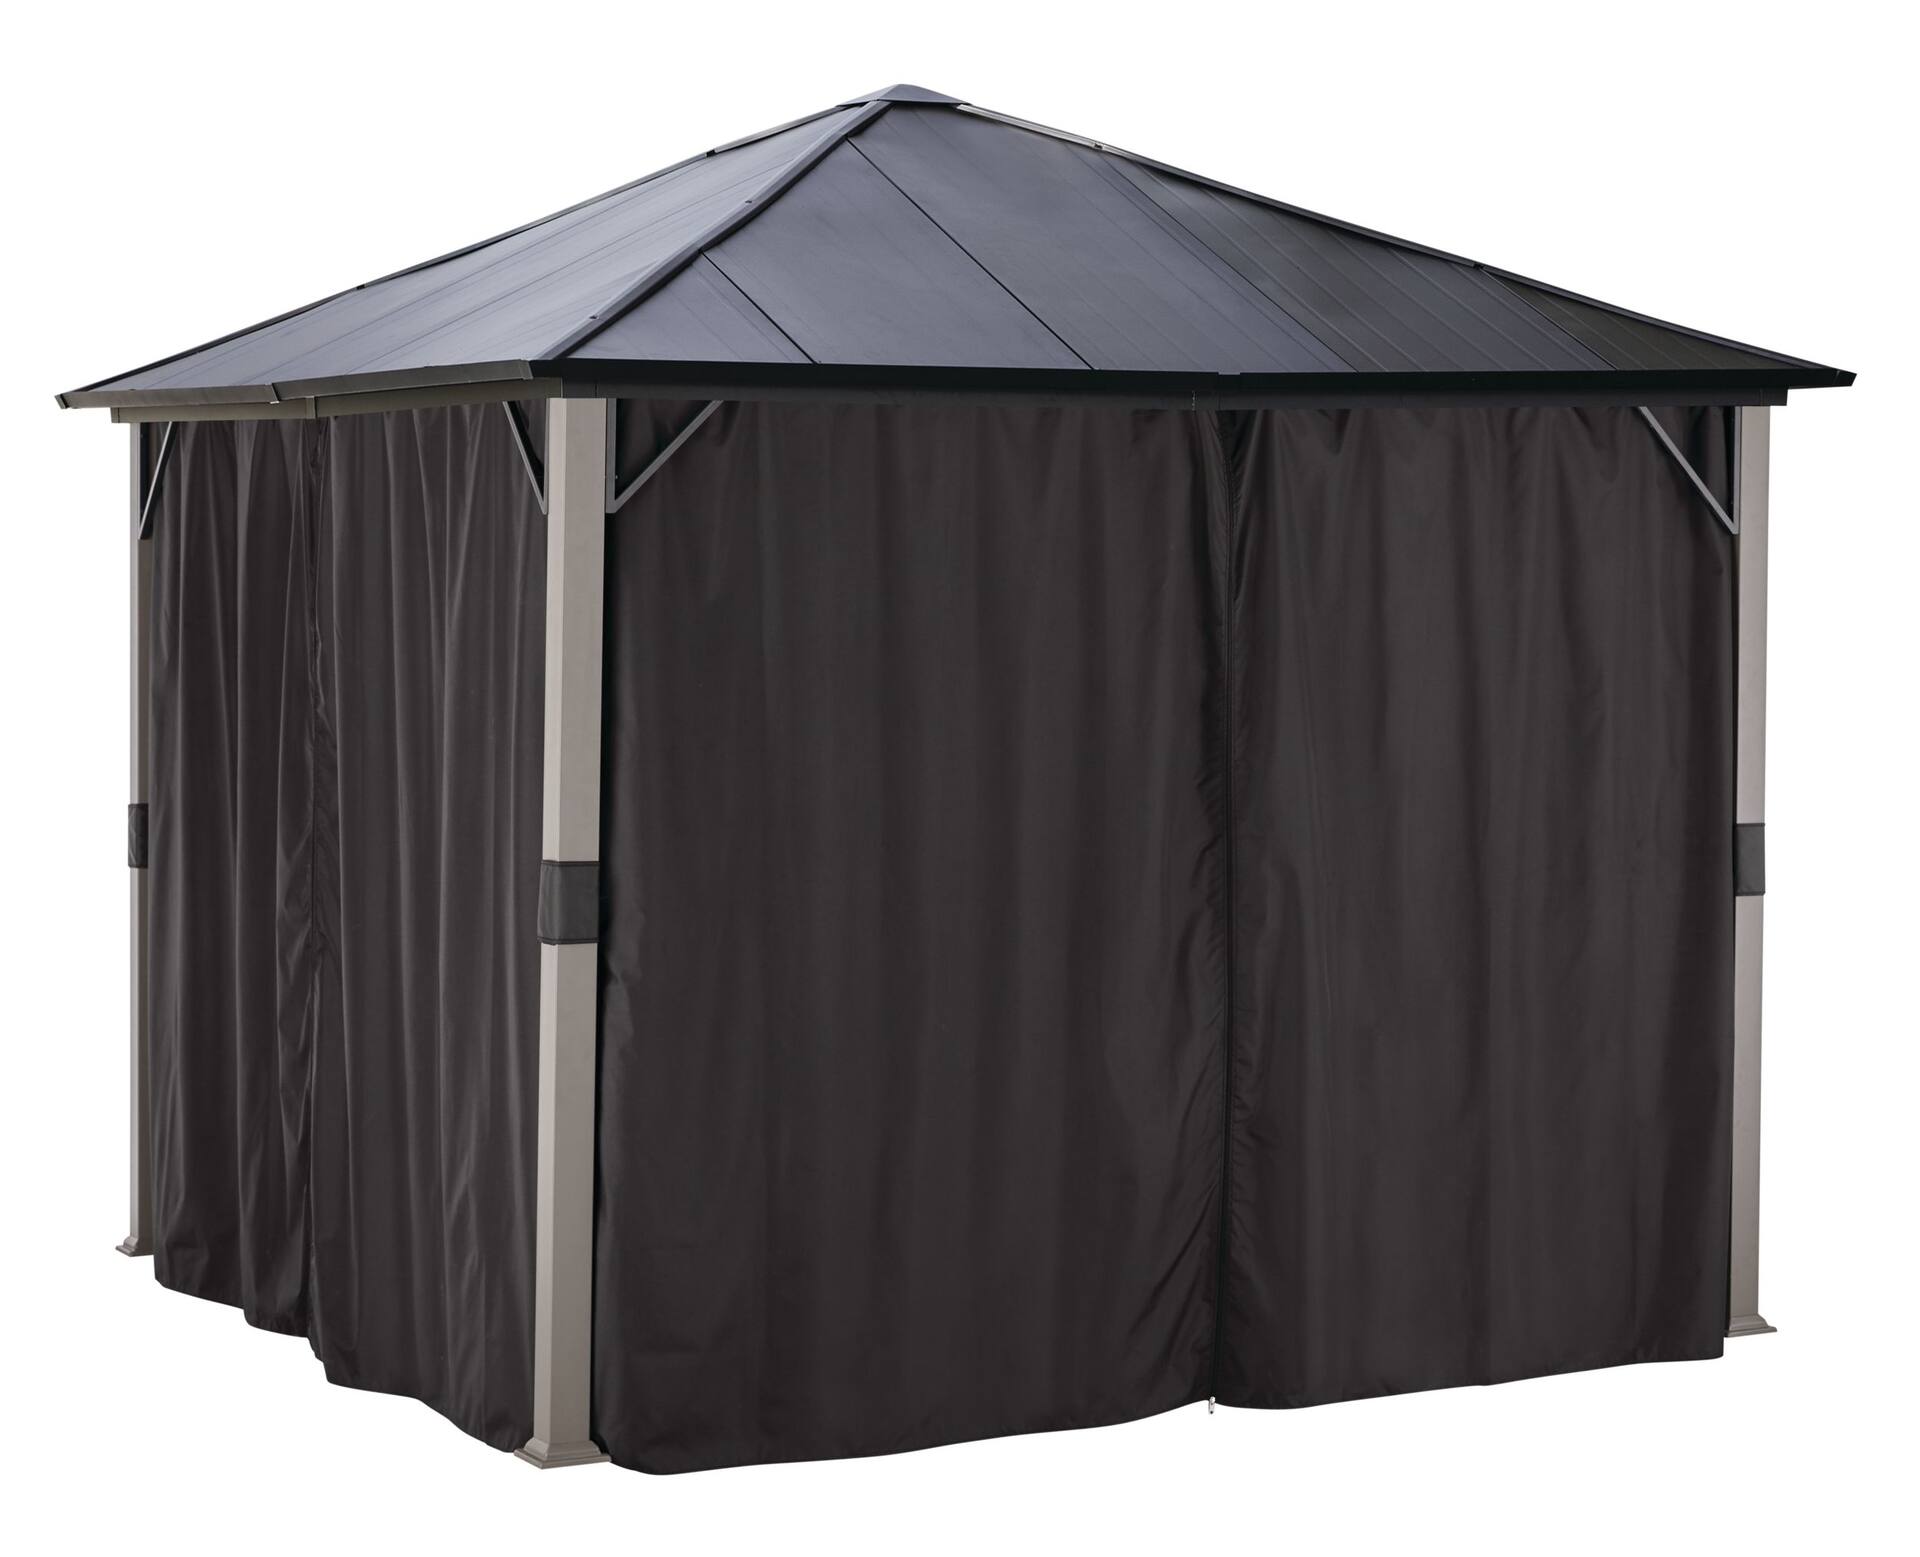 For Living Rockport Fabric Outdoor/Patio Gazebo Walls, for Hard 